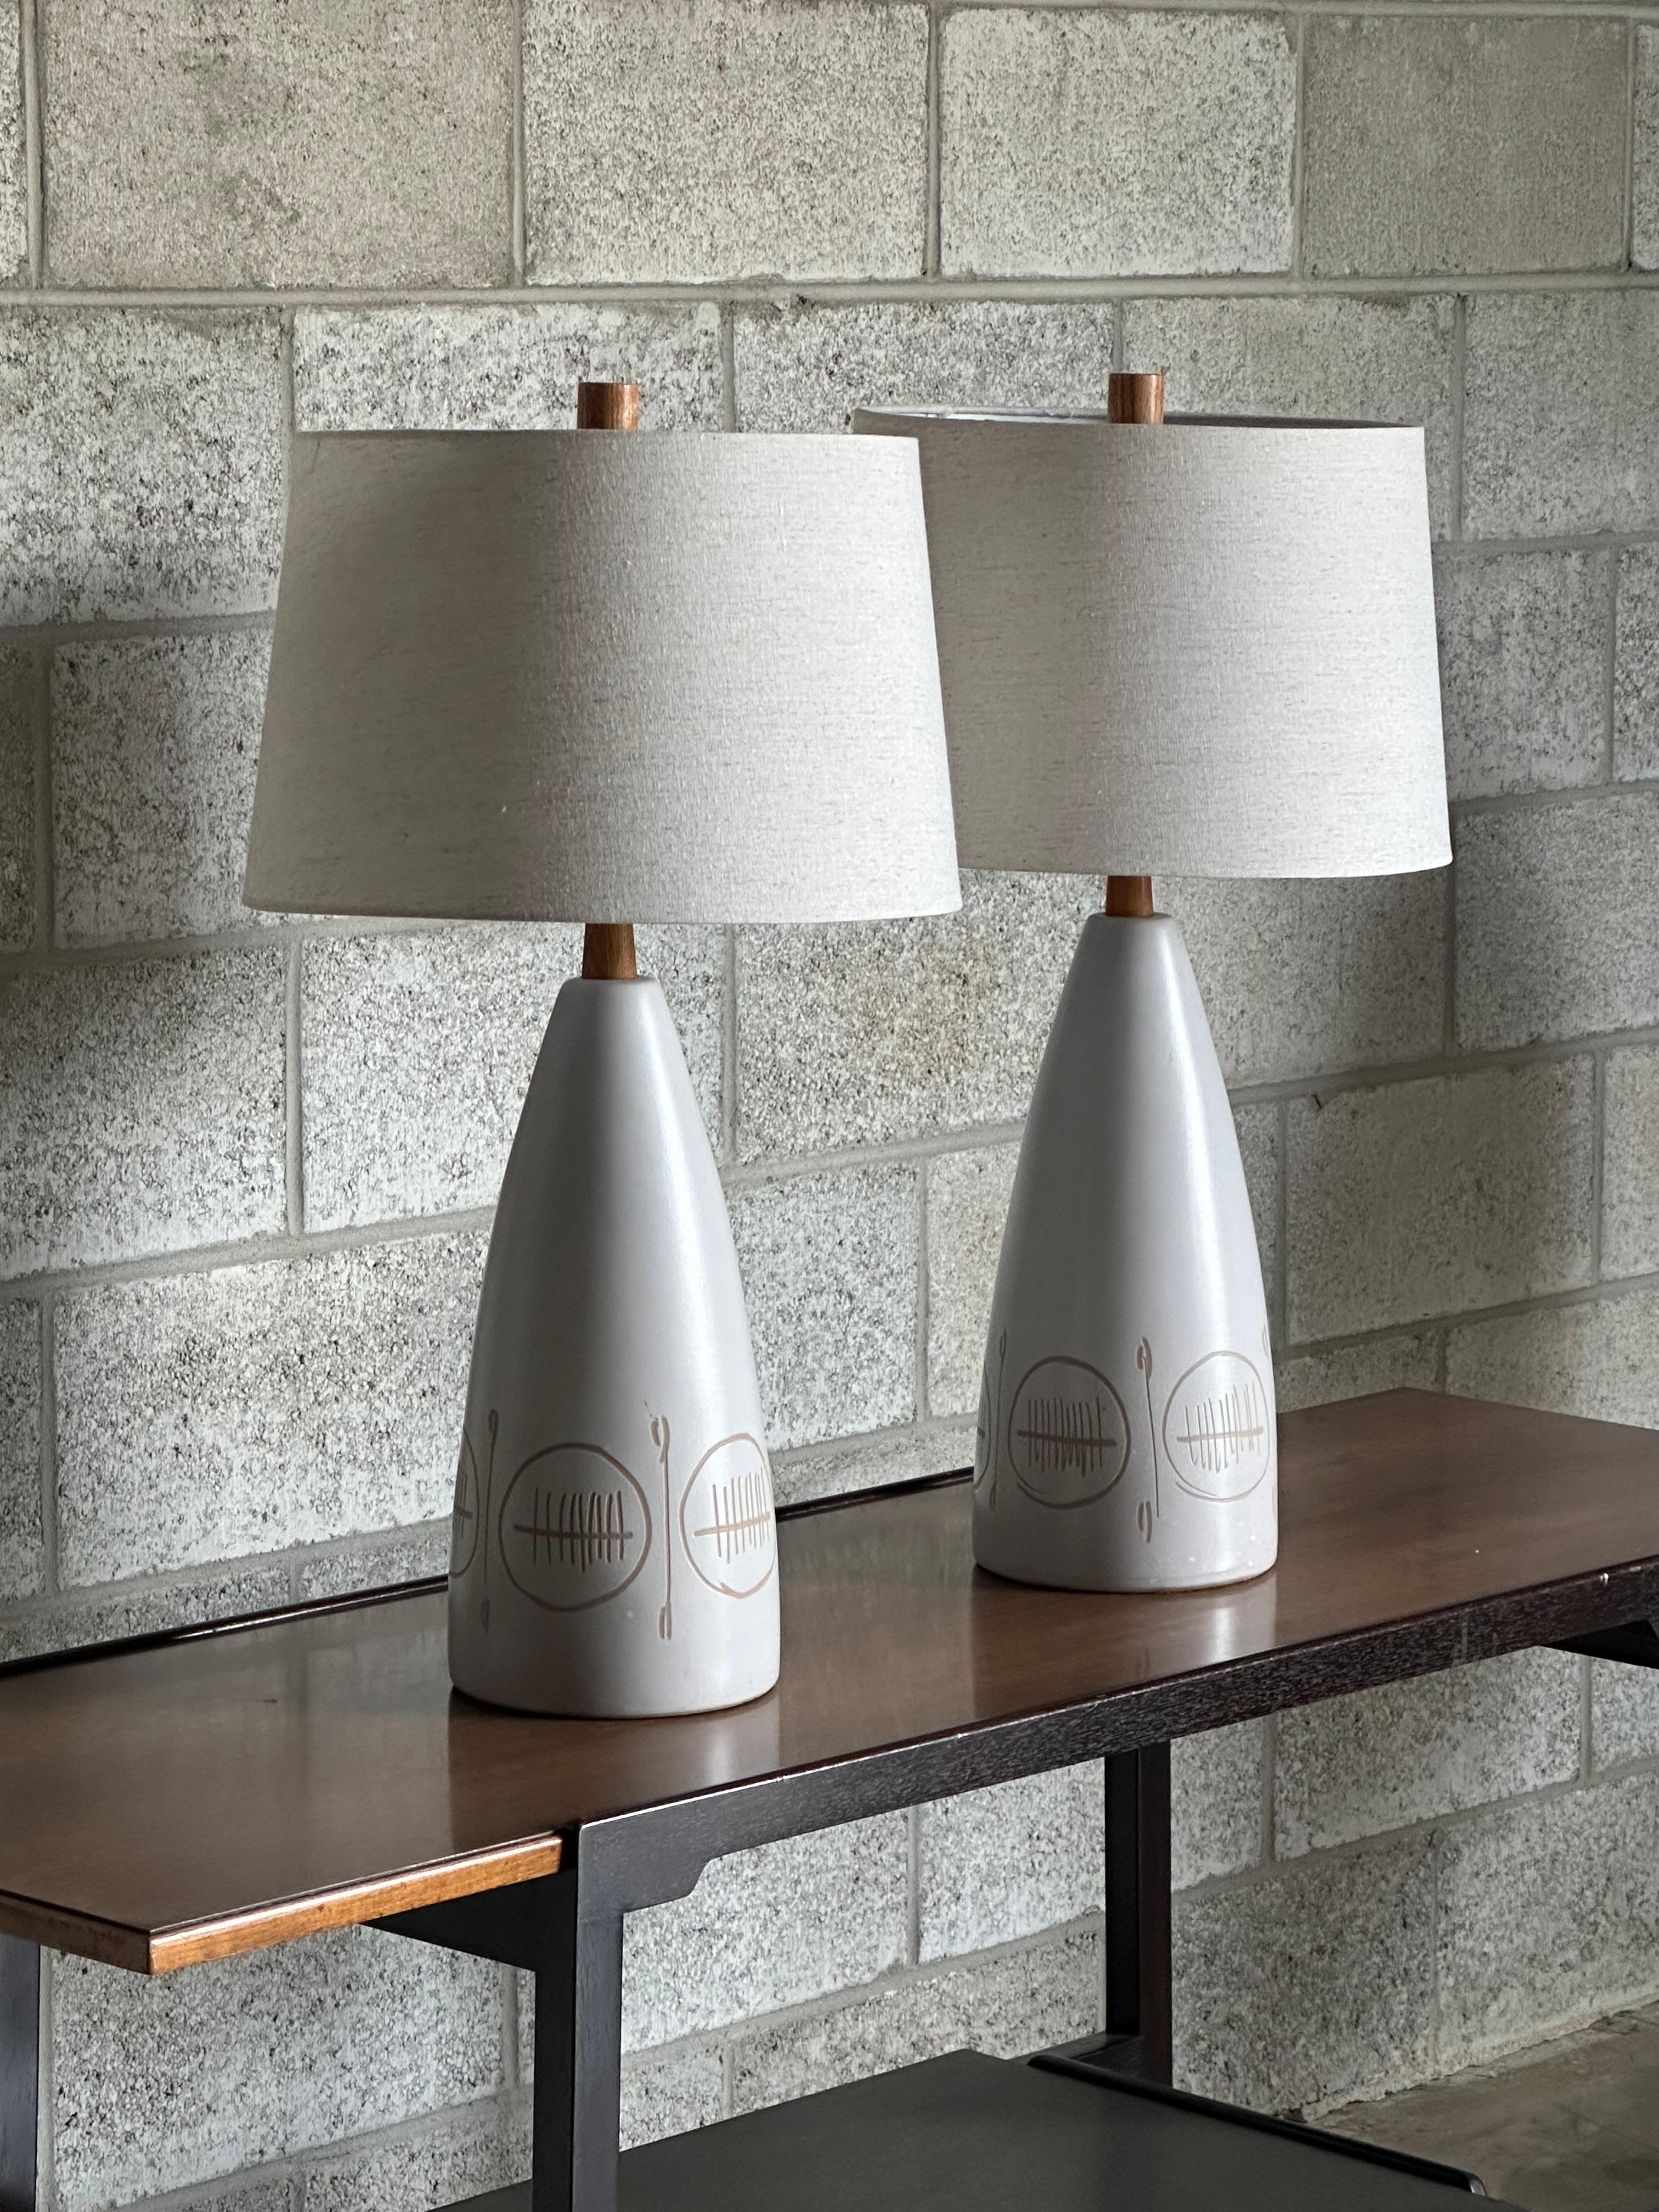 Mid-Century Modern Martz Lamps by Jane and Gordon Martz for Marshall Studios, Ceramic Table Lamps